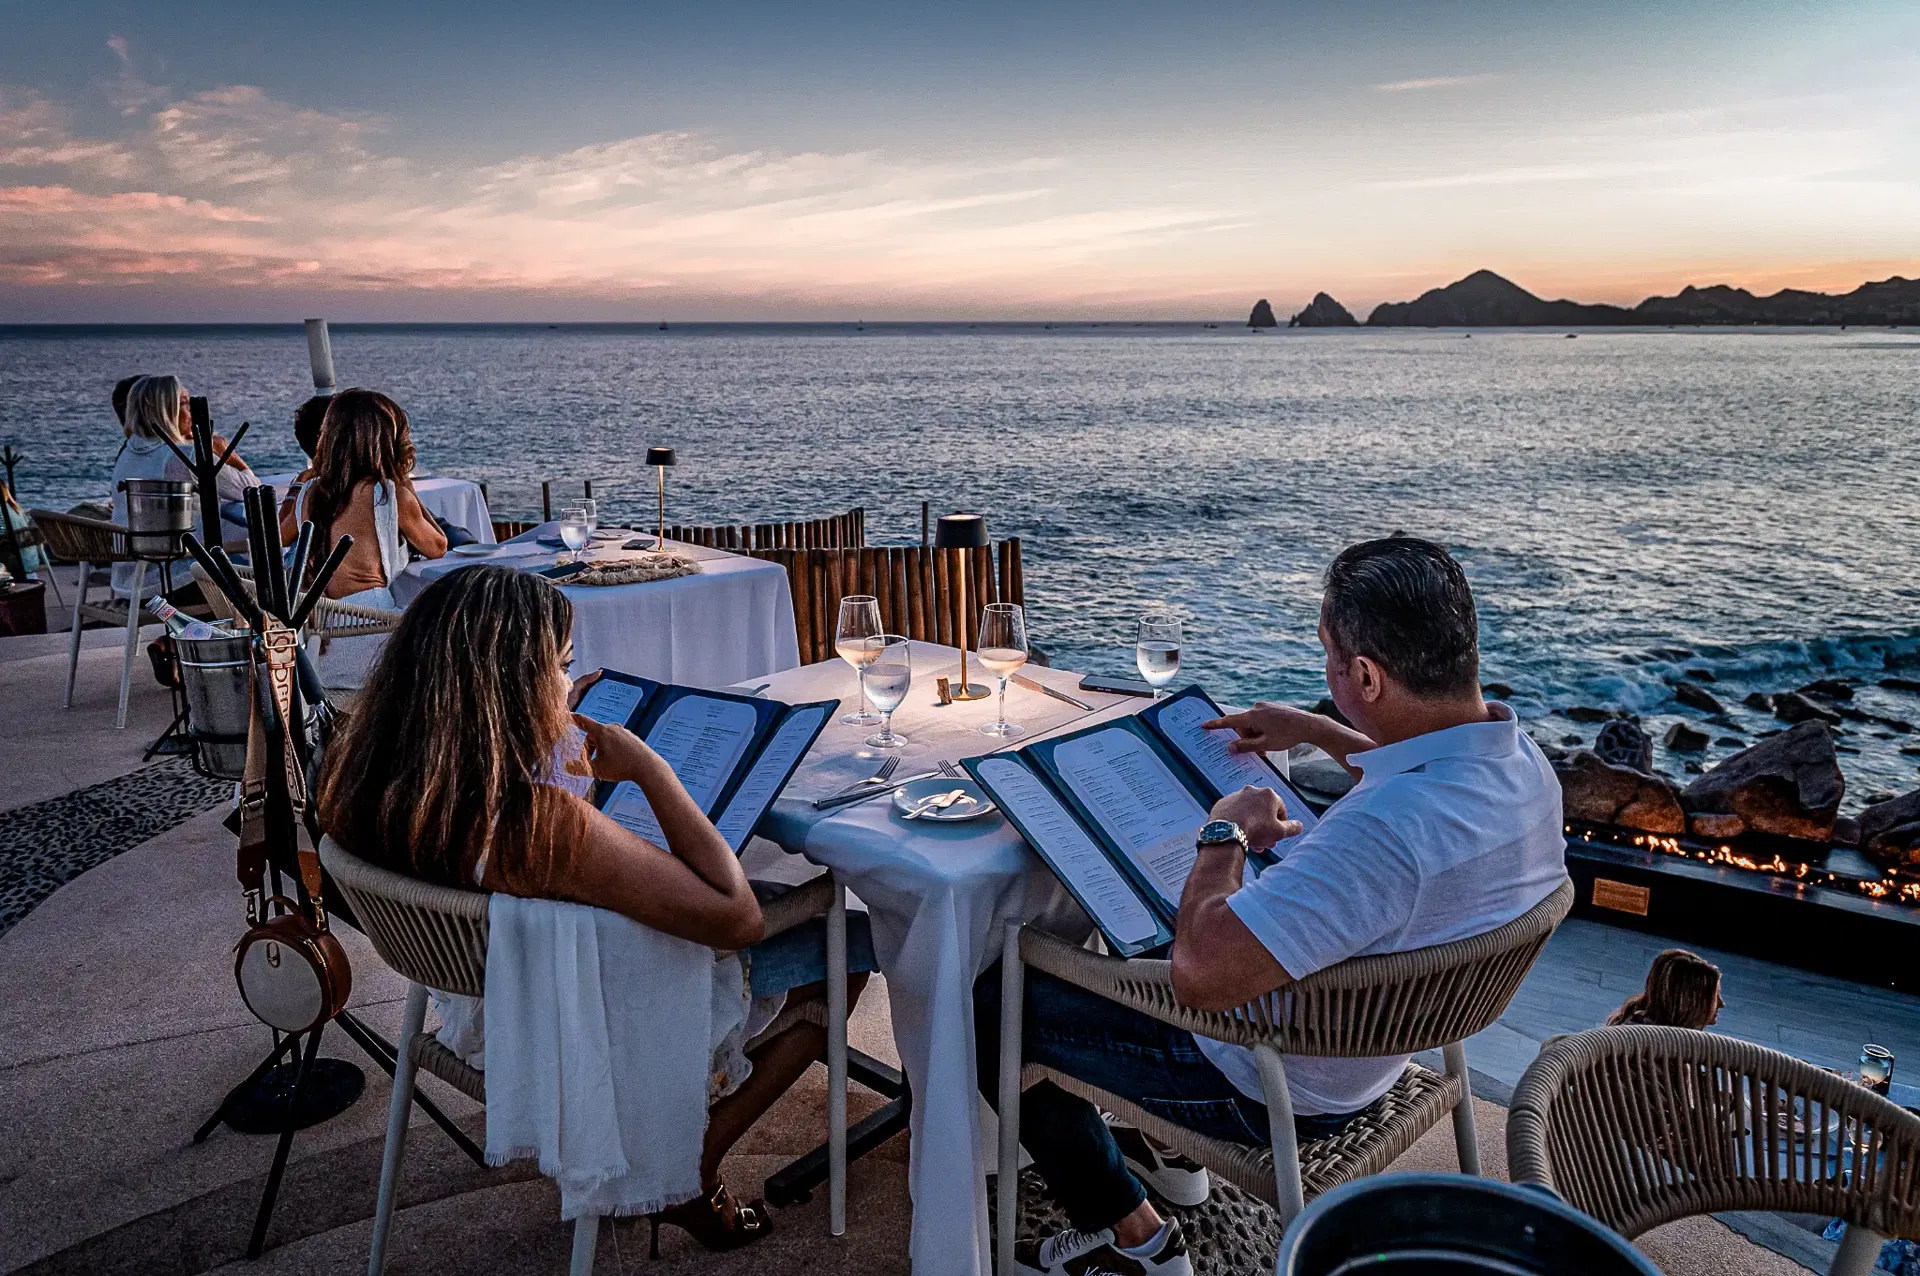 people having a dinner at sunset Monalisa ocean view with sunset at the background to the pacific ocean.